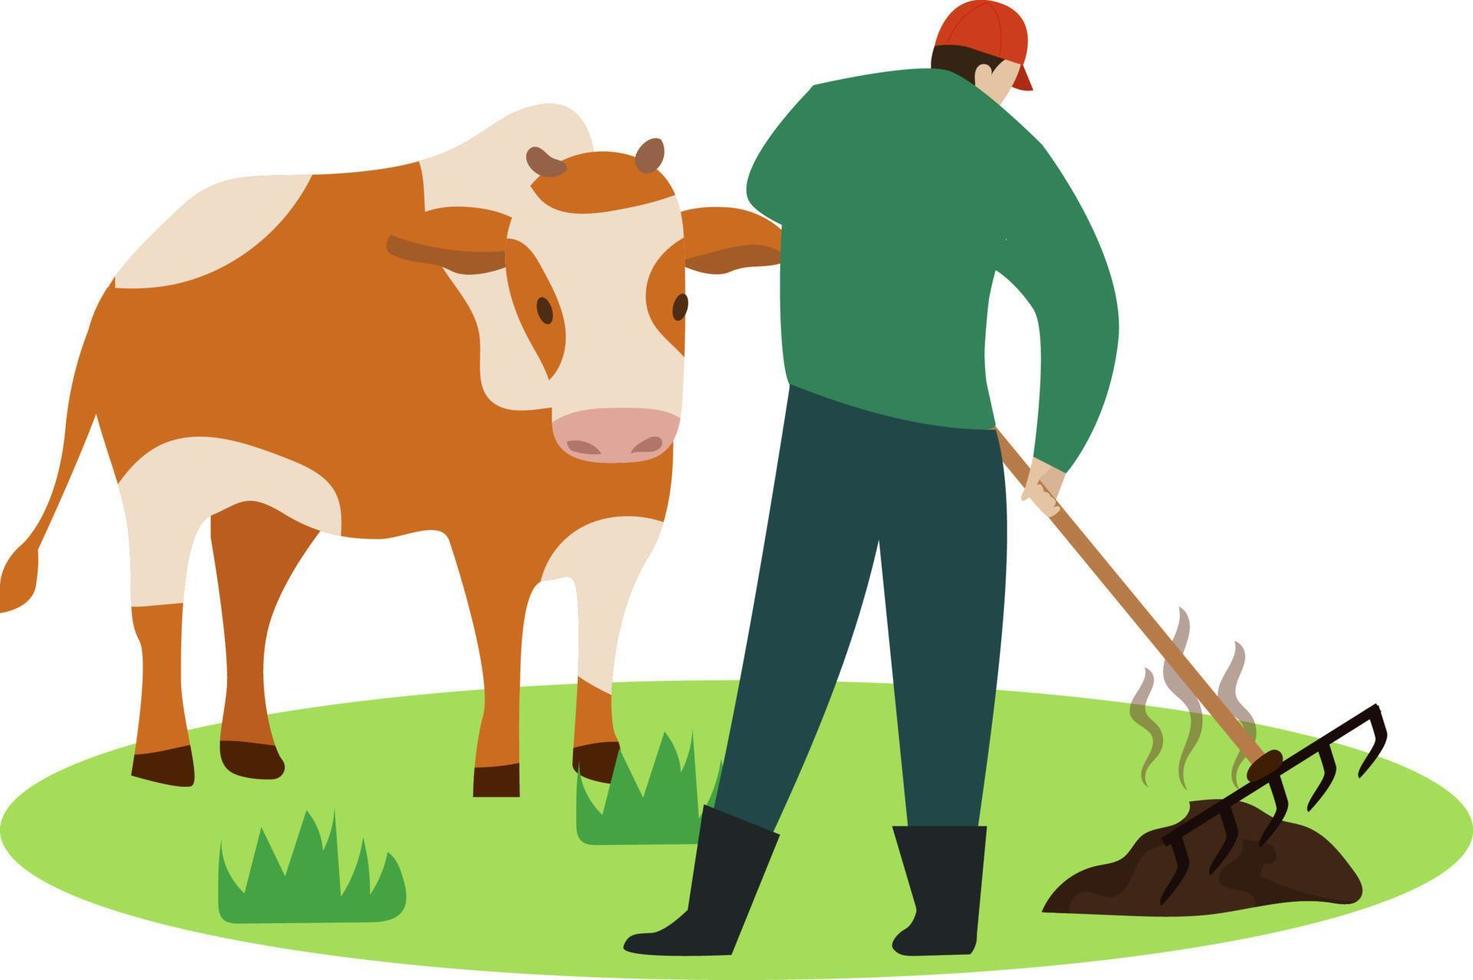 Male farmer cleaning cow dung on the grass, Cow shitting, pooping. Cow dung, farmer making manure from cow dung vector illustration, farmer cattle concept illustration